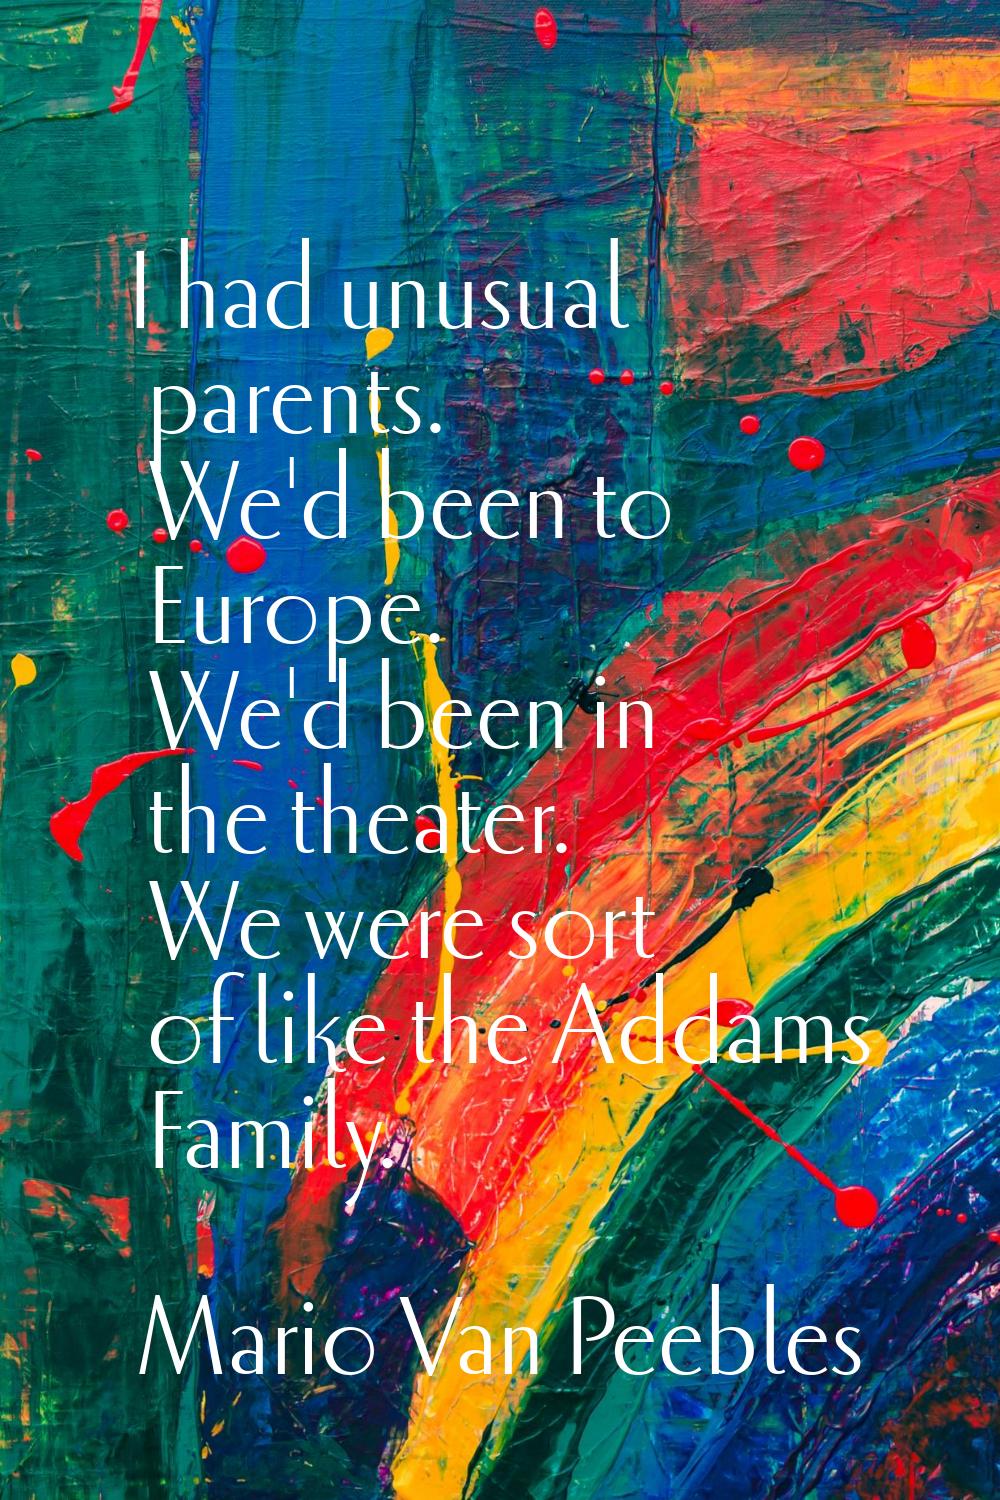 I had unusual parents. We'd been to Europe. We'd been in the theater. We were sort of like the Adda